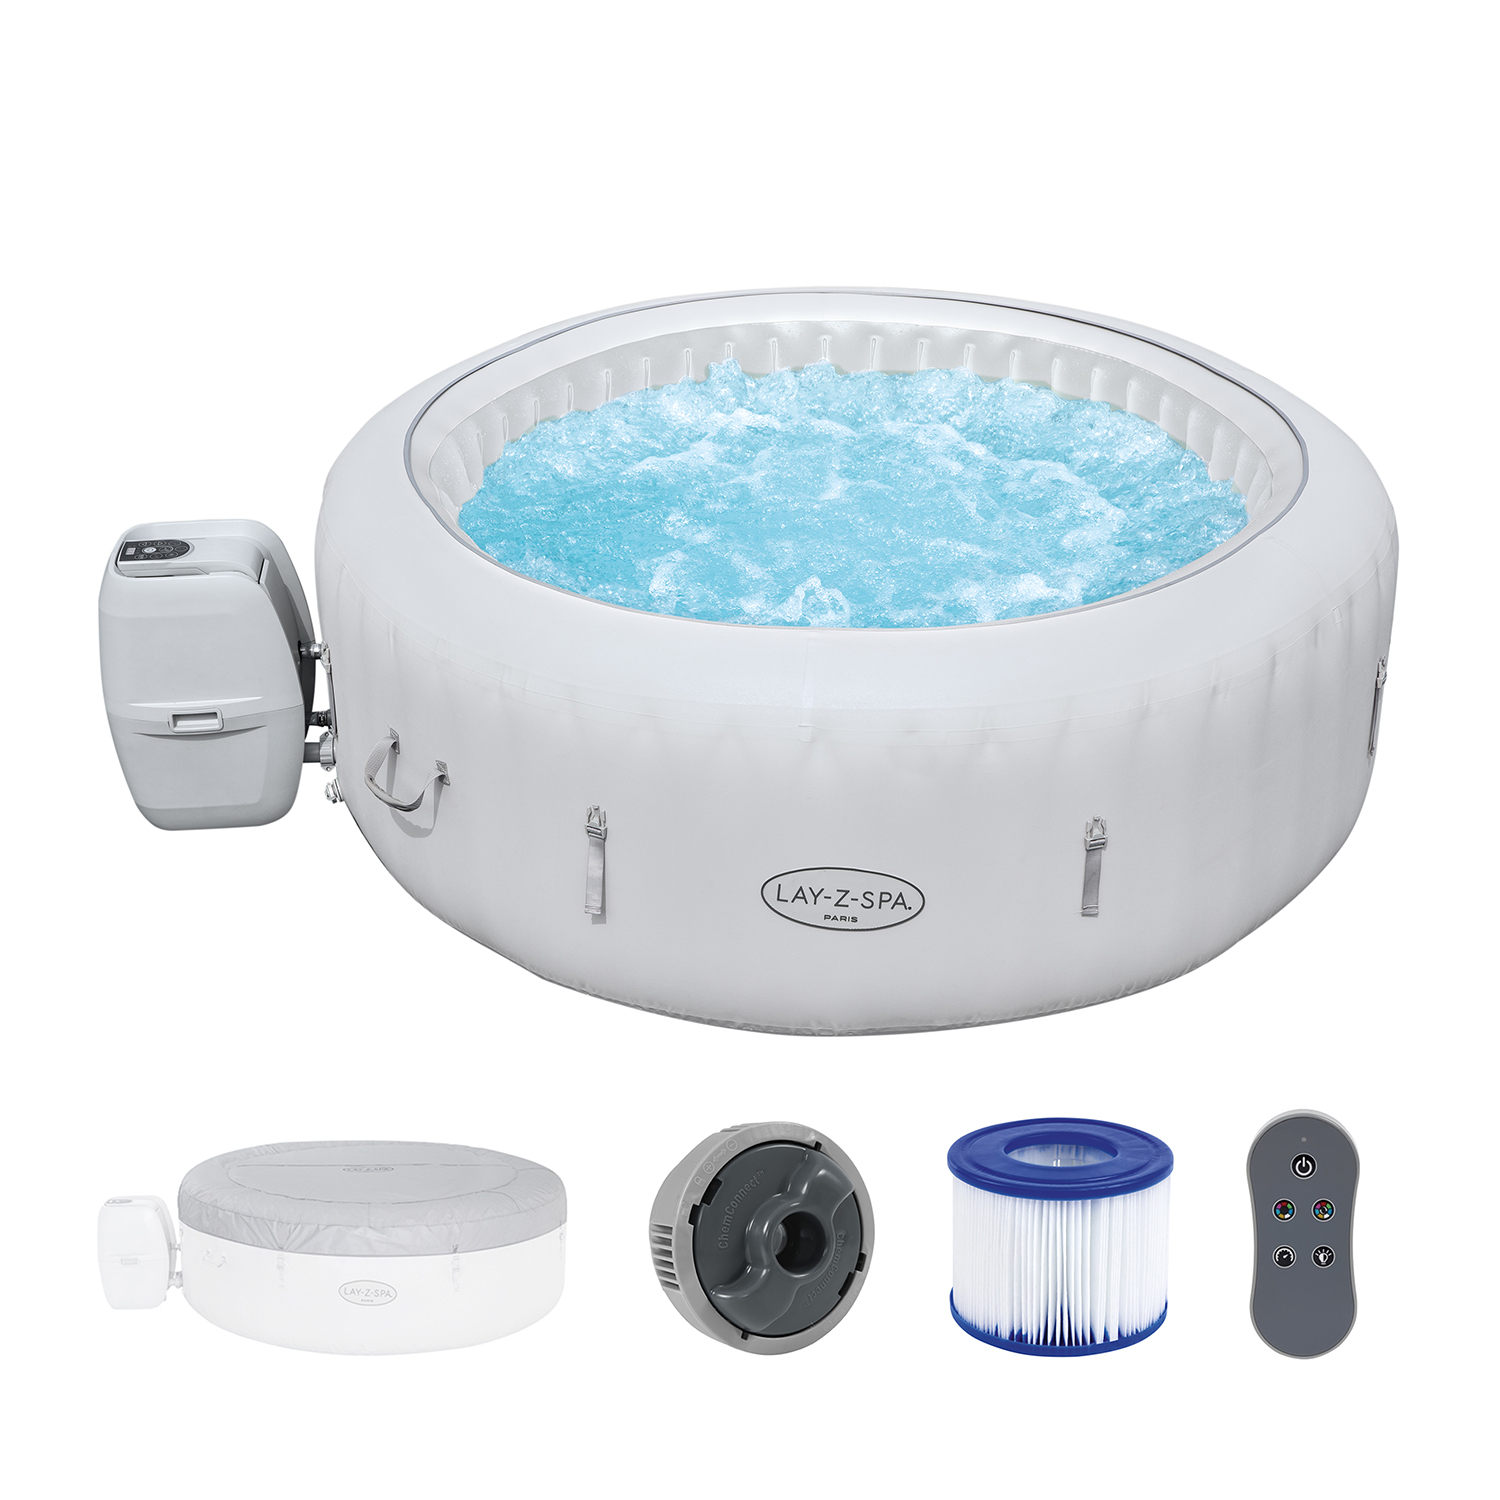 LAY-Z-SPA® LED-Whirlpool Paris 66 Whirlpools Lay-Z-Spa 196 Ø Whirlpools | | x Zubehör cm, Whirlpools & Alle | rund AirJet™